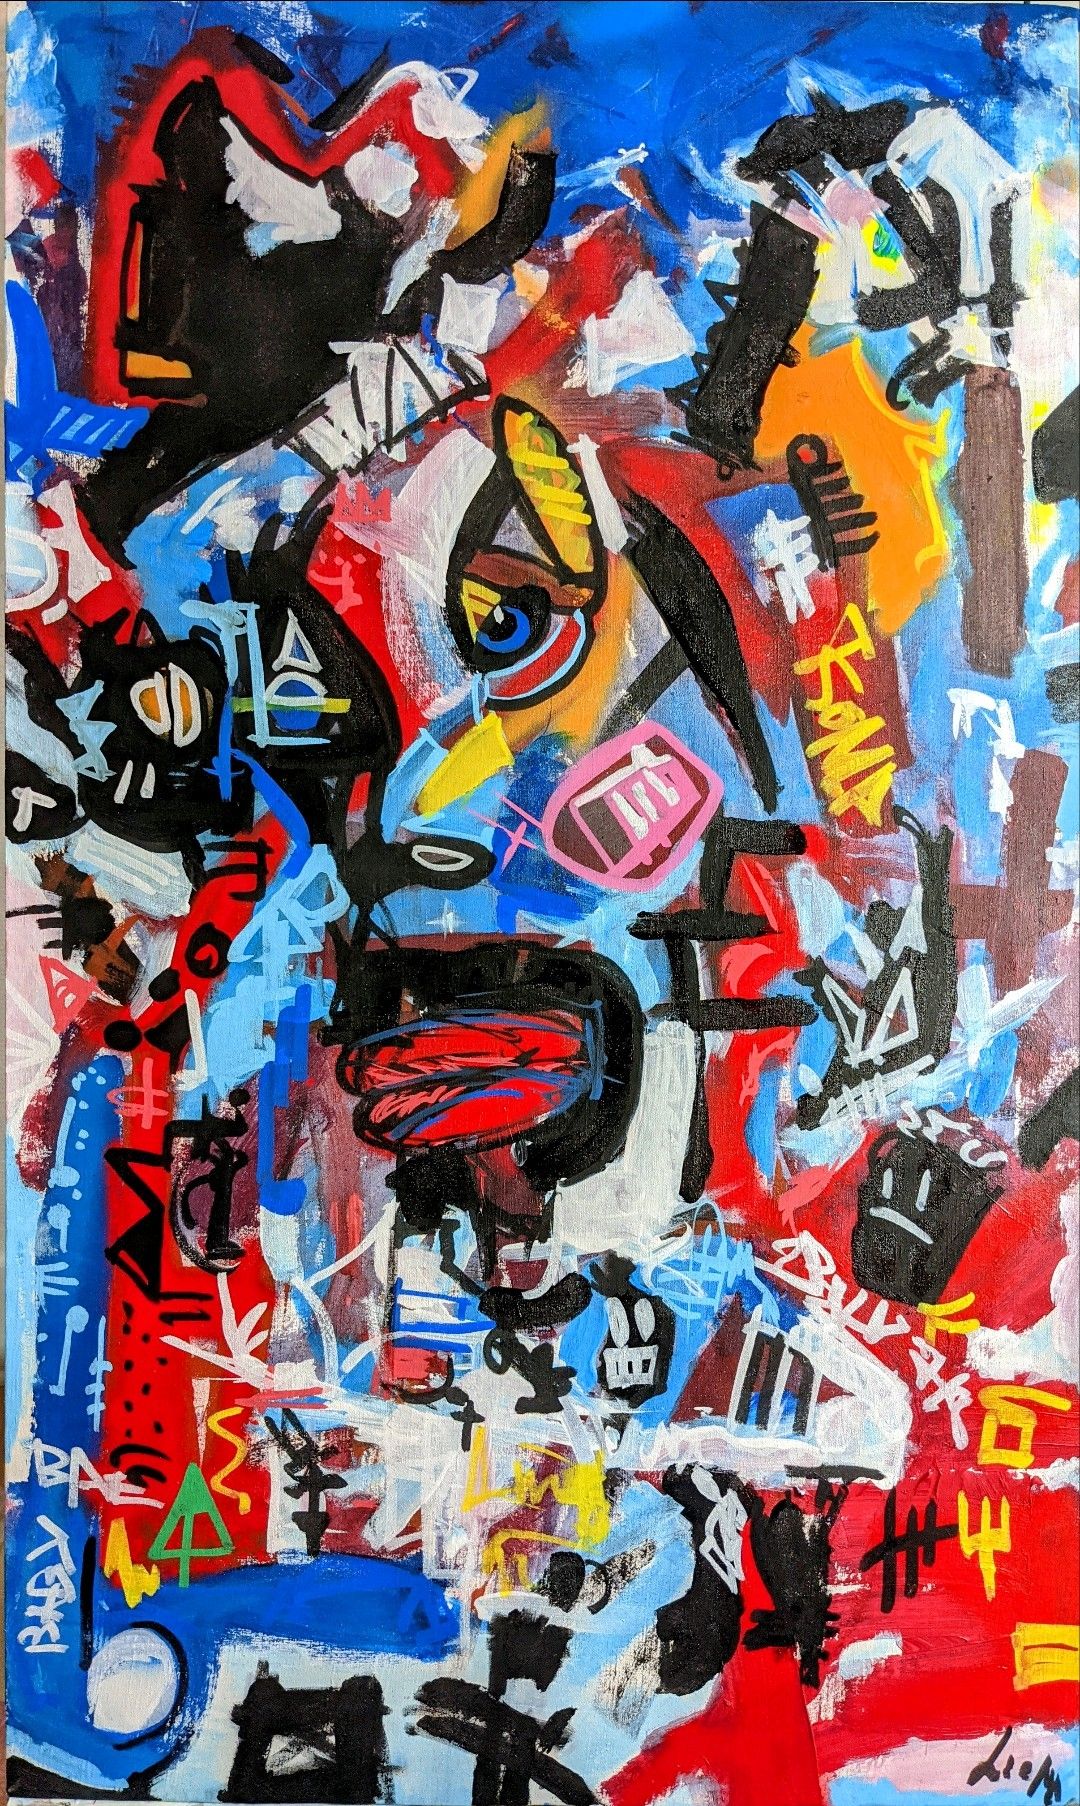 Acrylic and mixed media painting titled 'The Last Carnival' by Lionel Thomas, showcasing a prominent central character against the canvas backdrop, created in Geneva 2021.